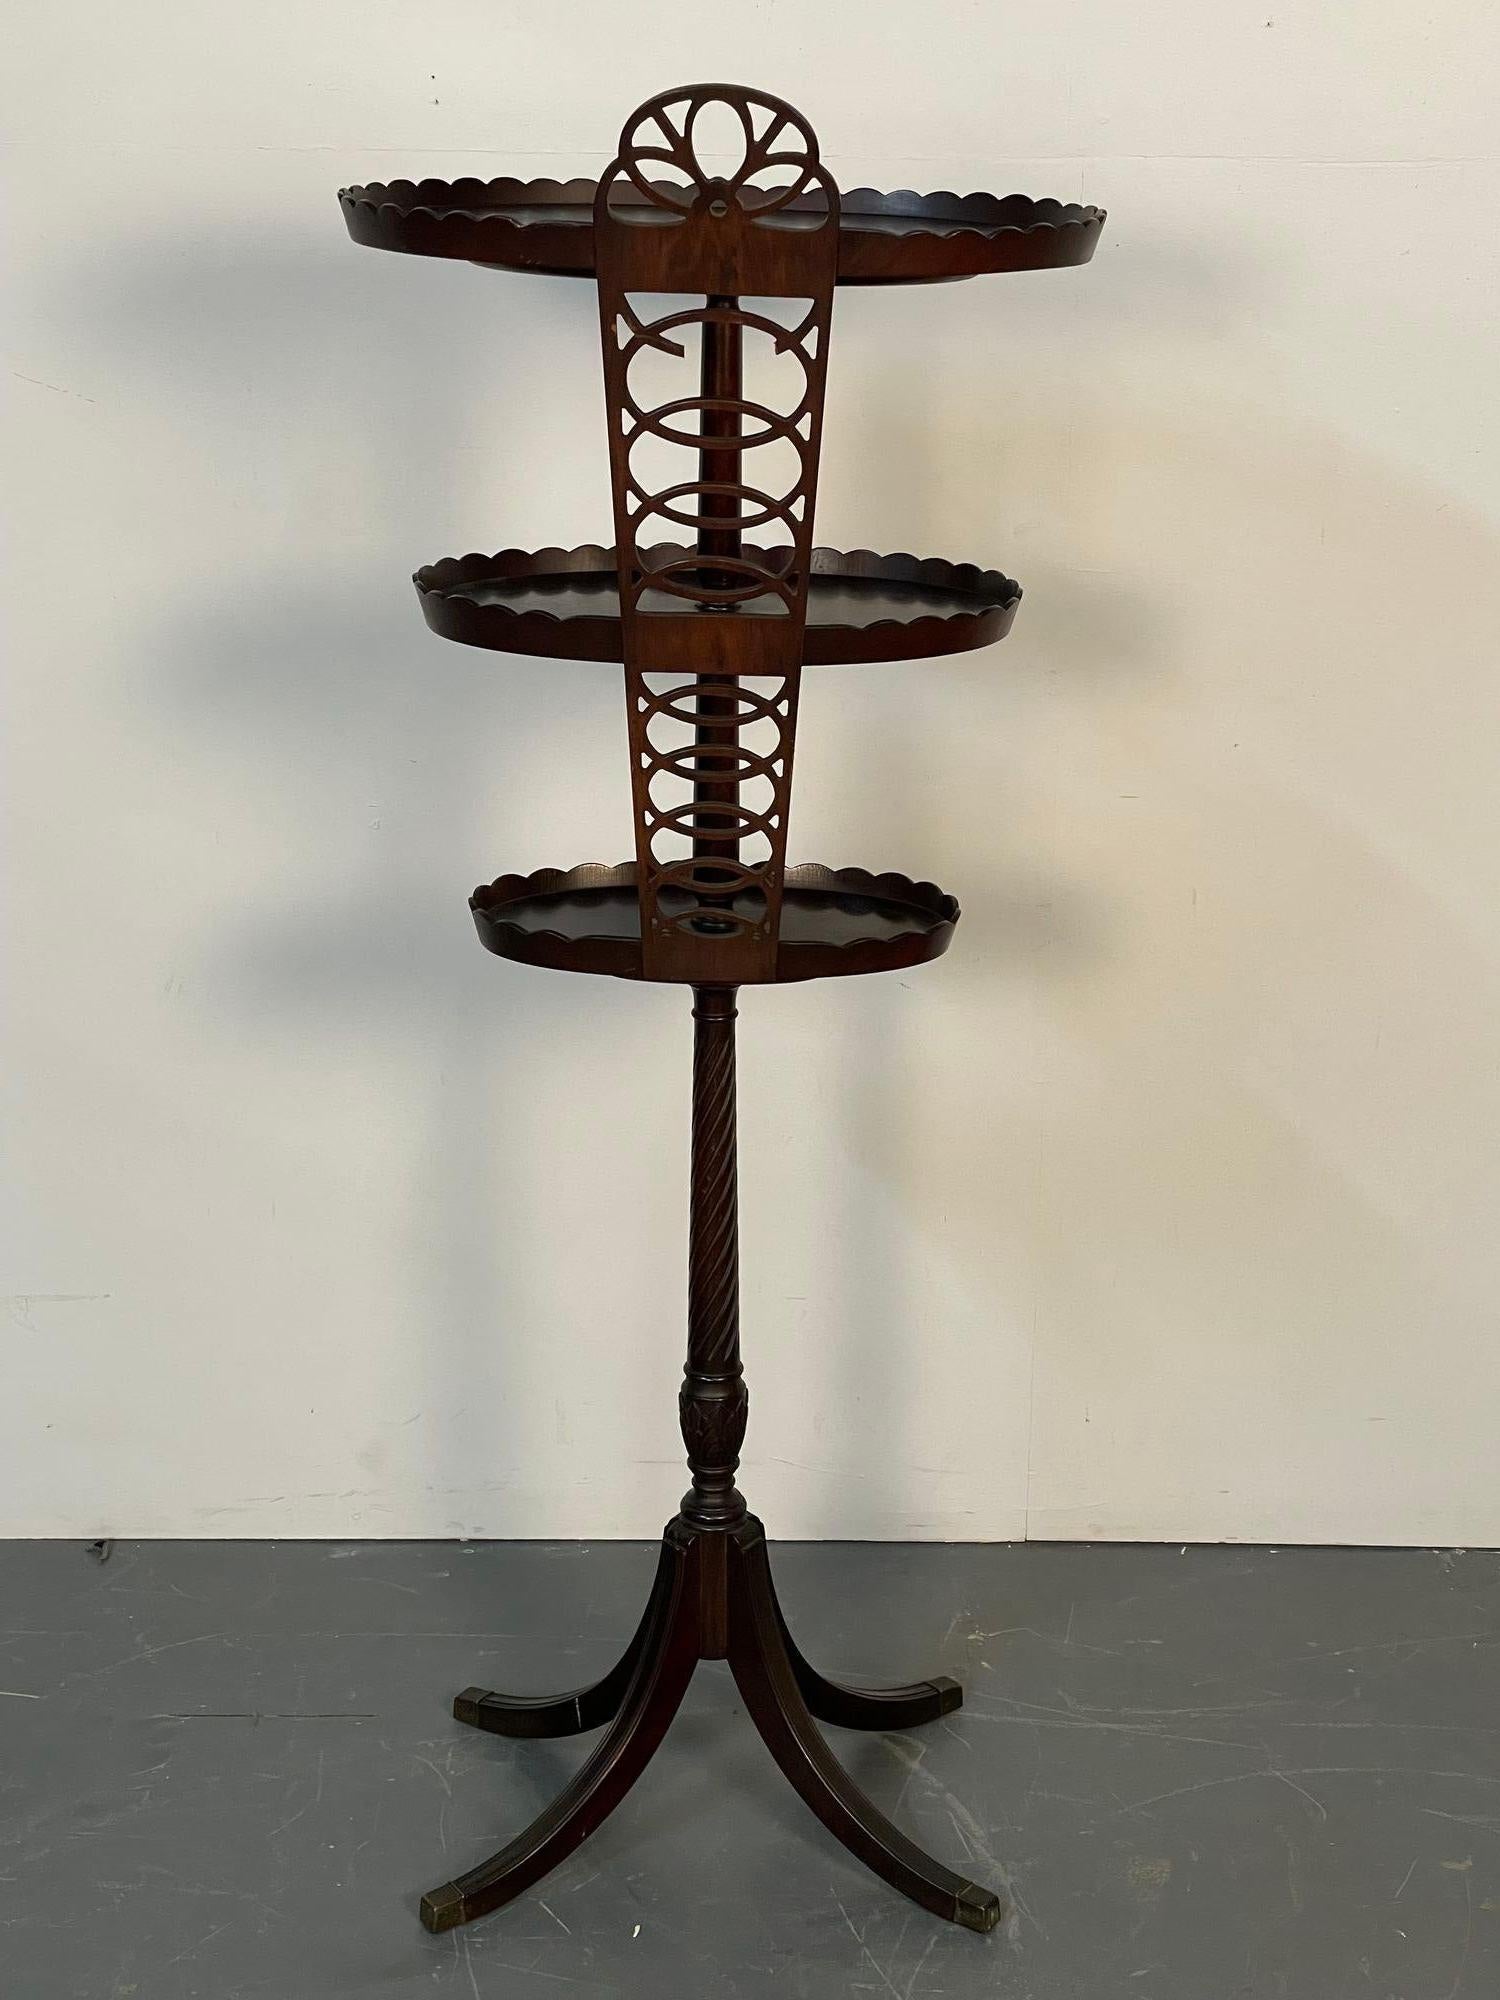 Georgian Style Mahogany tri-shelf desert stand / dining room accent décor
A stunning desert or plant stand in mahogany having four sprayed legs leading to center column support having three galleried shelves terminating in a full pierced back. A